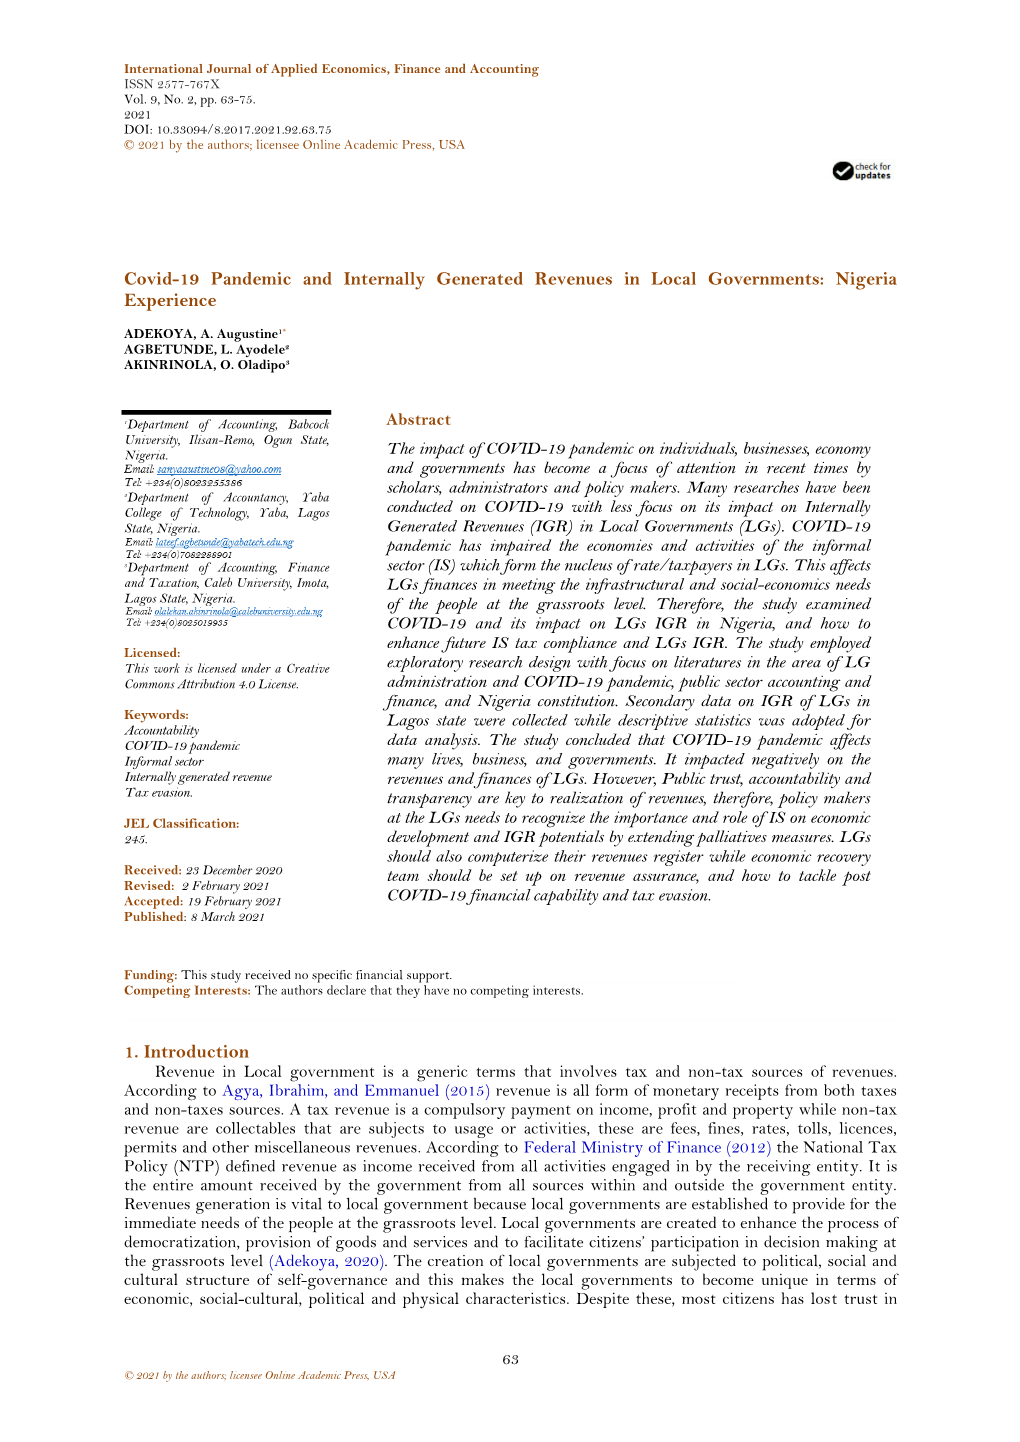 Covid-19 Pandemic and Internally Generated Revenues in Local Governments: Nigeria Experience